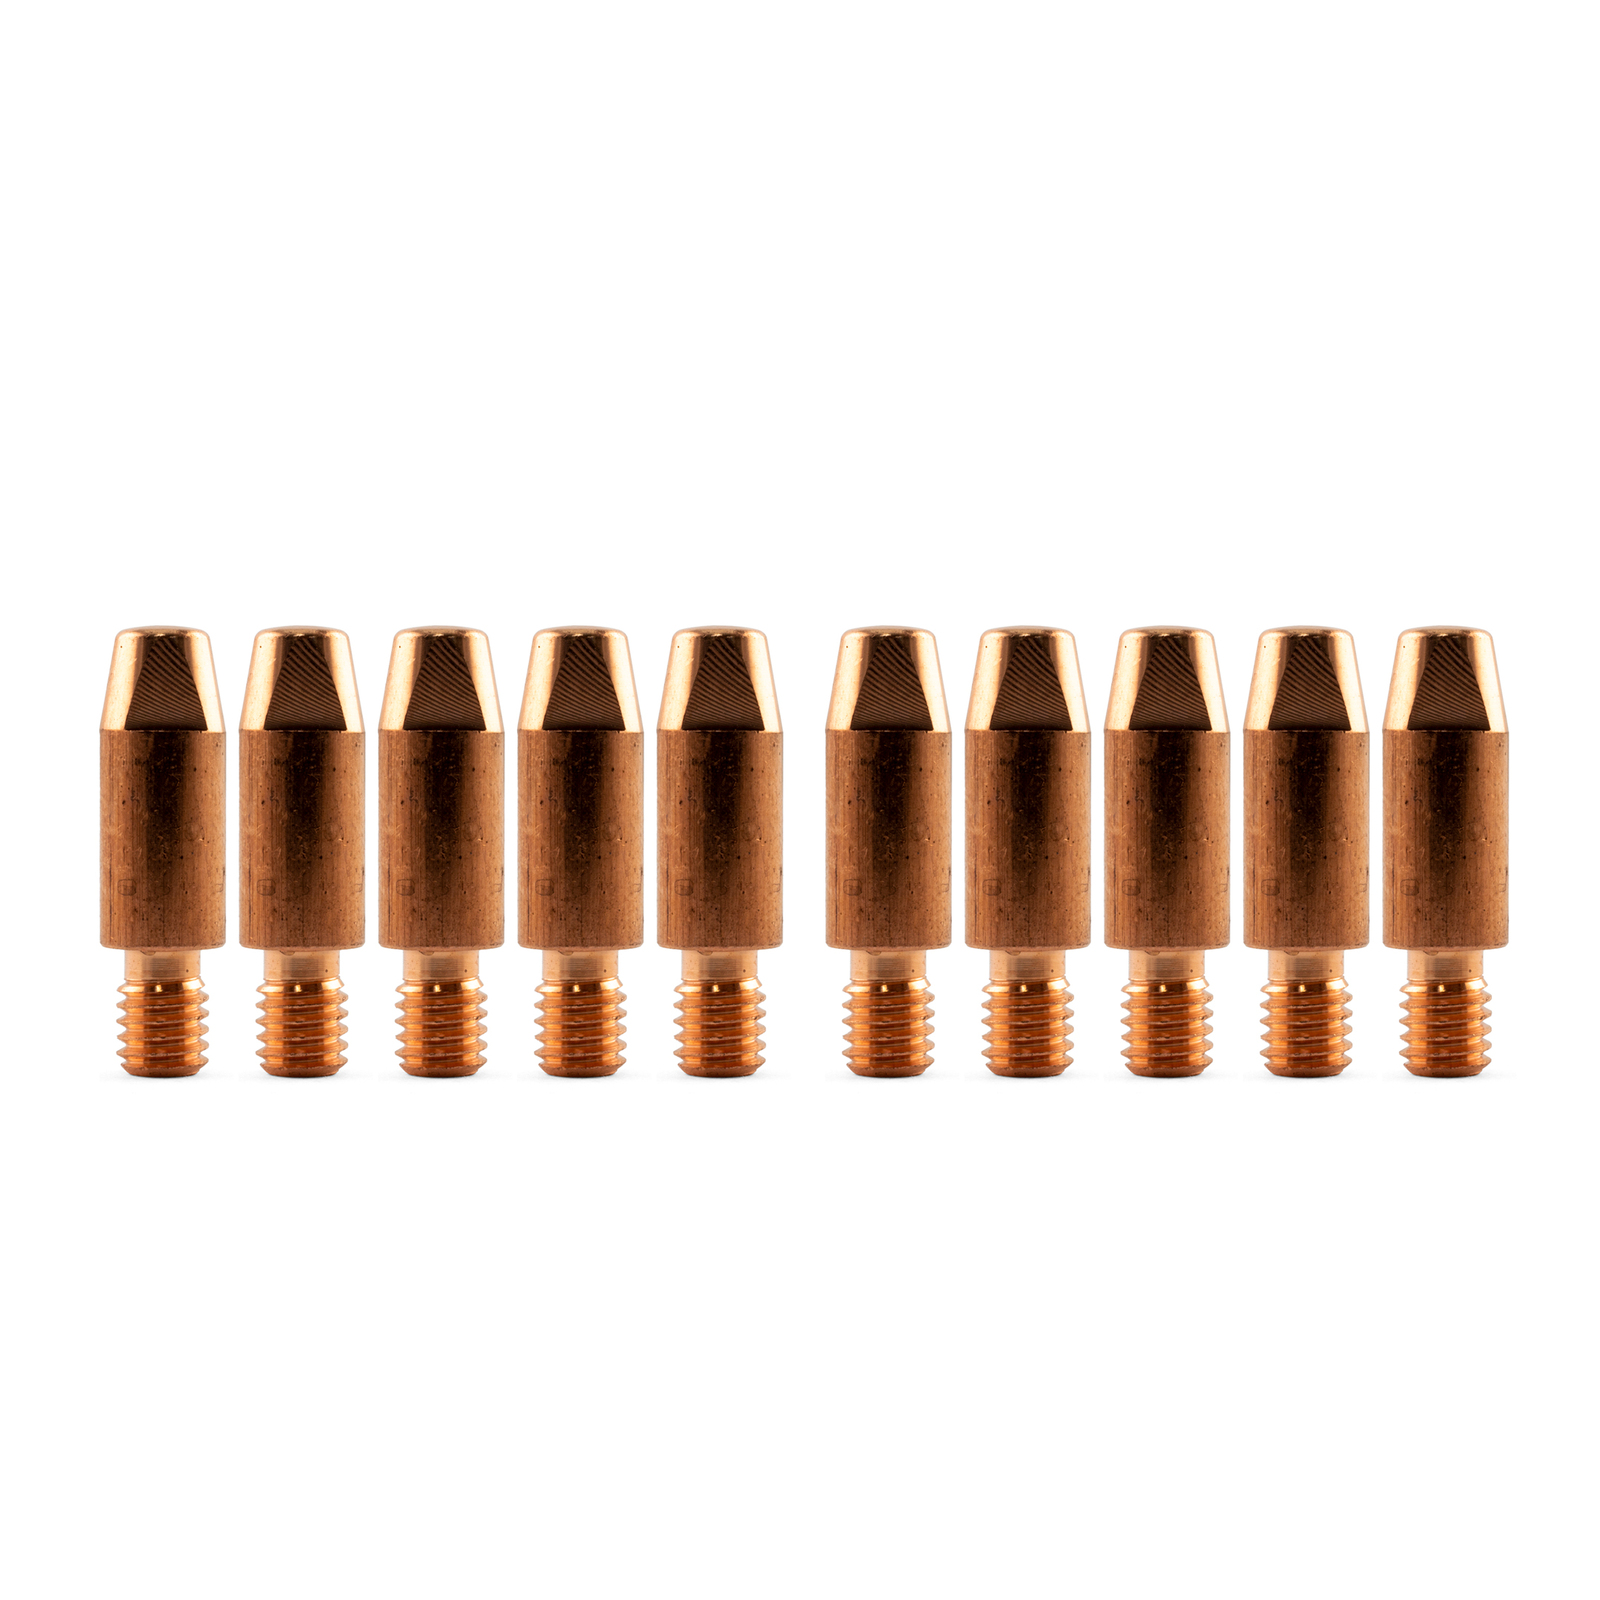 Binzel Style MIG Contact Tips for ALUMINIUM 1.2mm - 10 pack - M6 x 8mm x 1.2mm